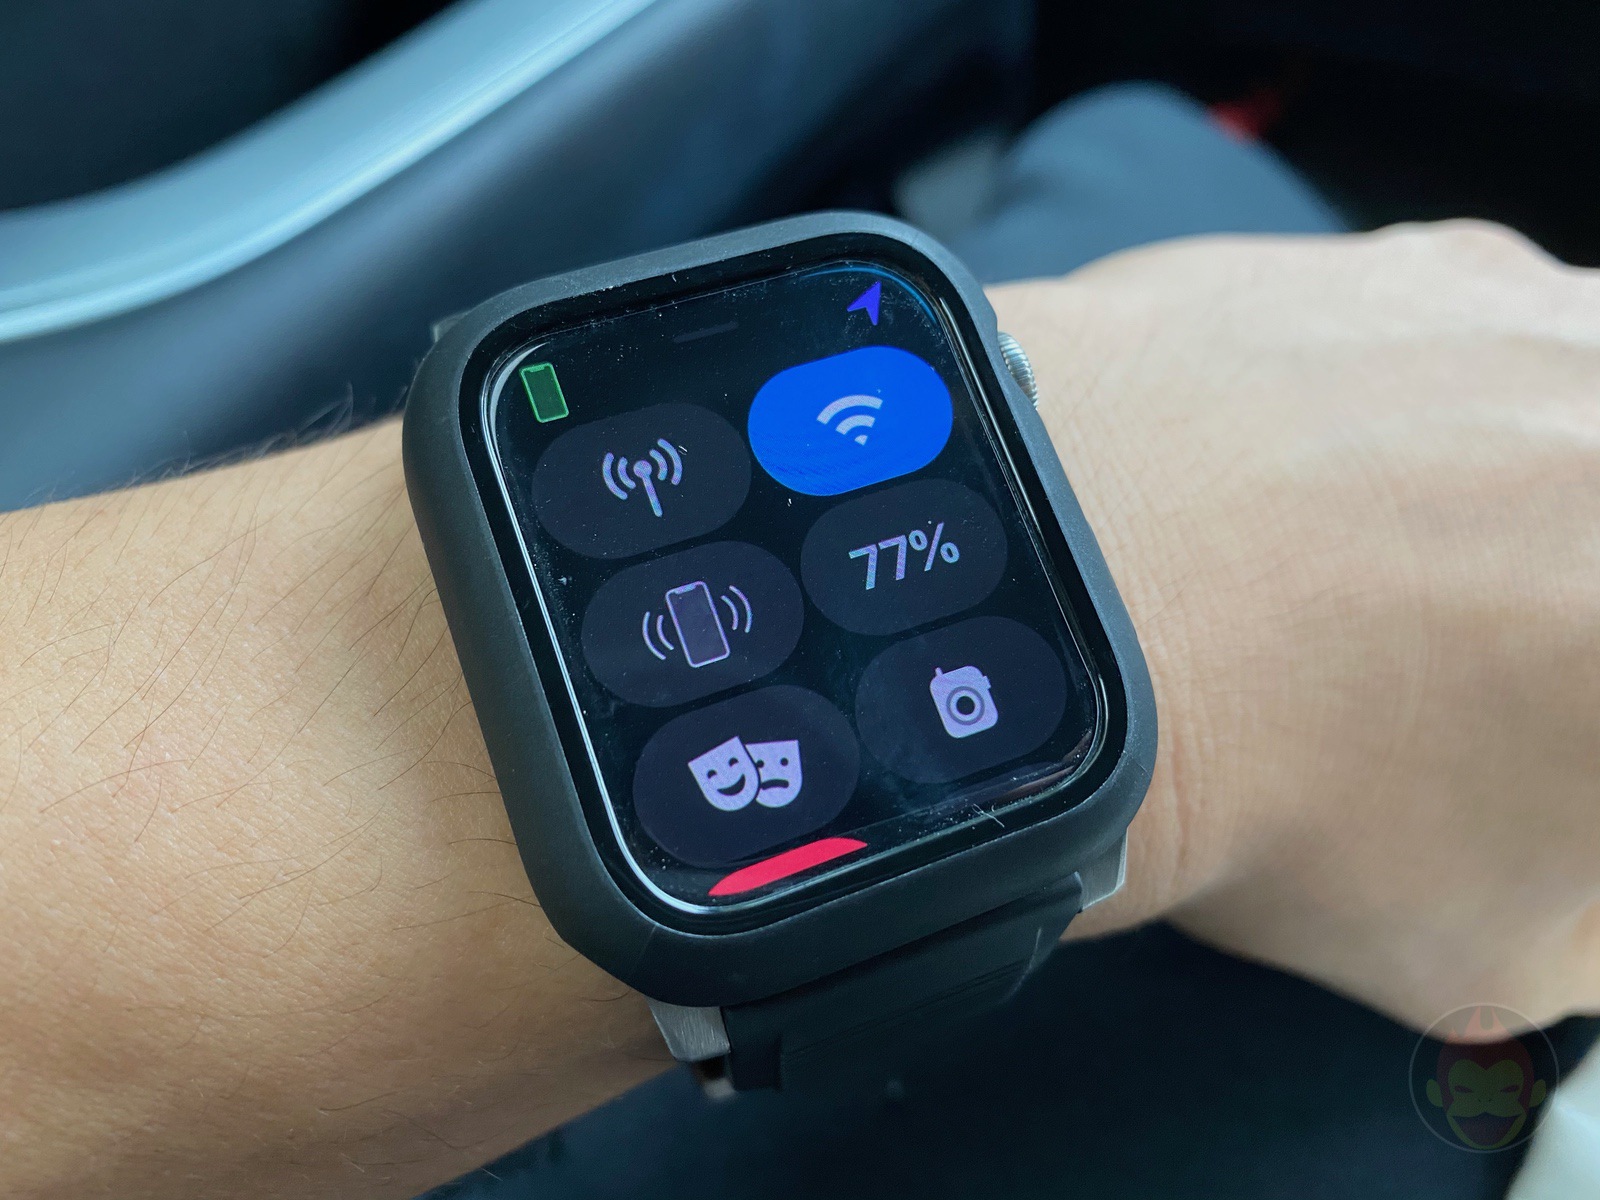 AppleWatchSeries6 With AODisplay ON 07